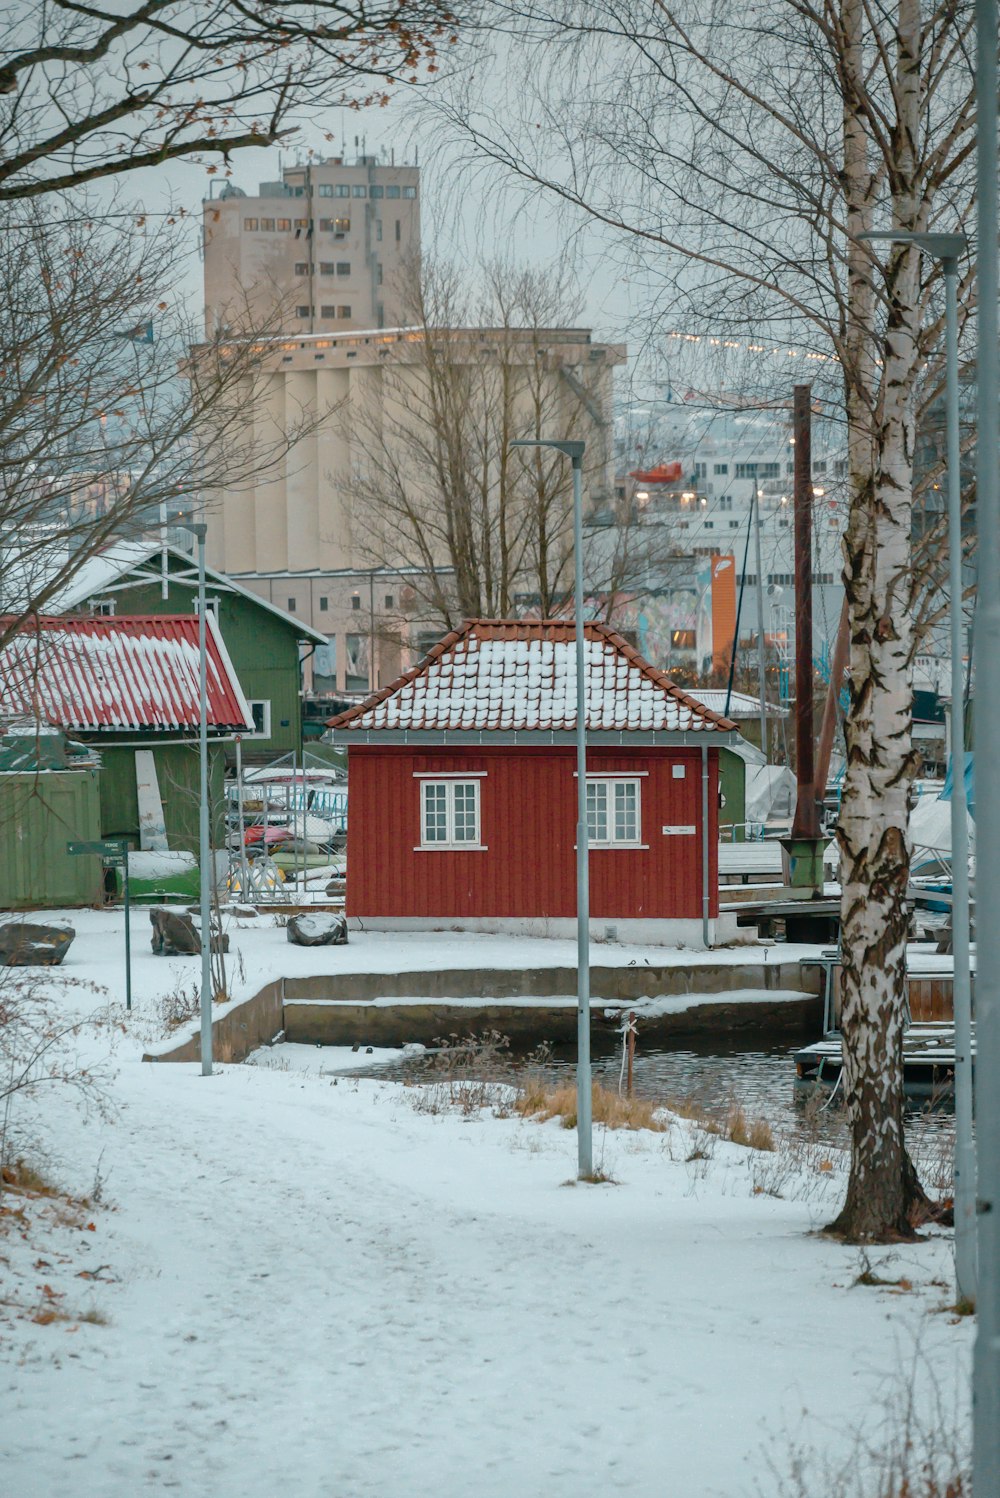 a small red house in the middle of a snowy area